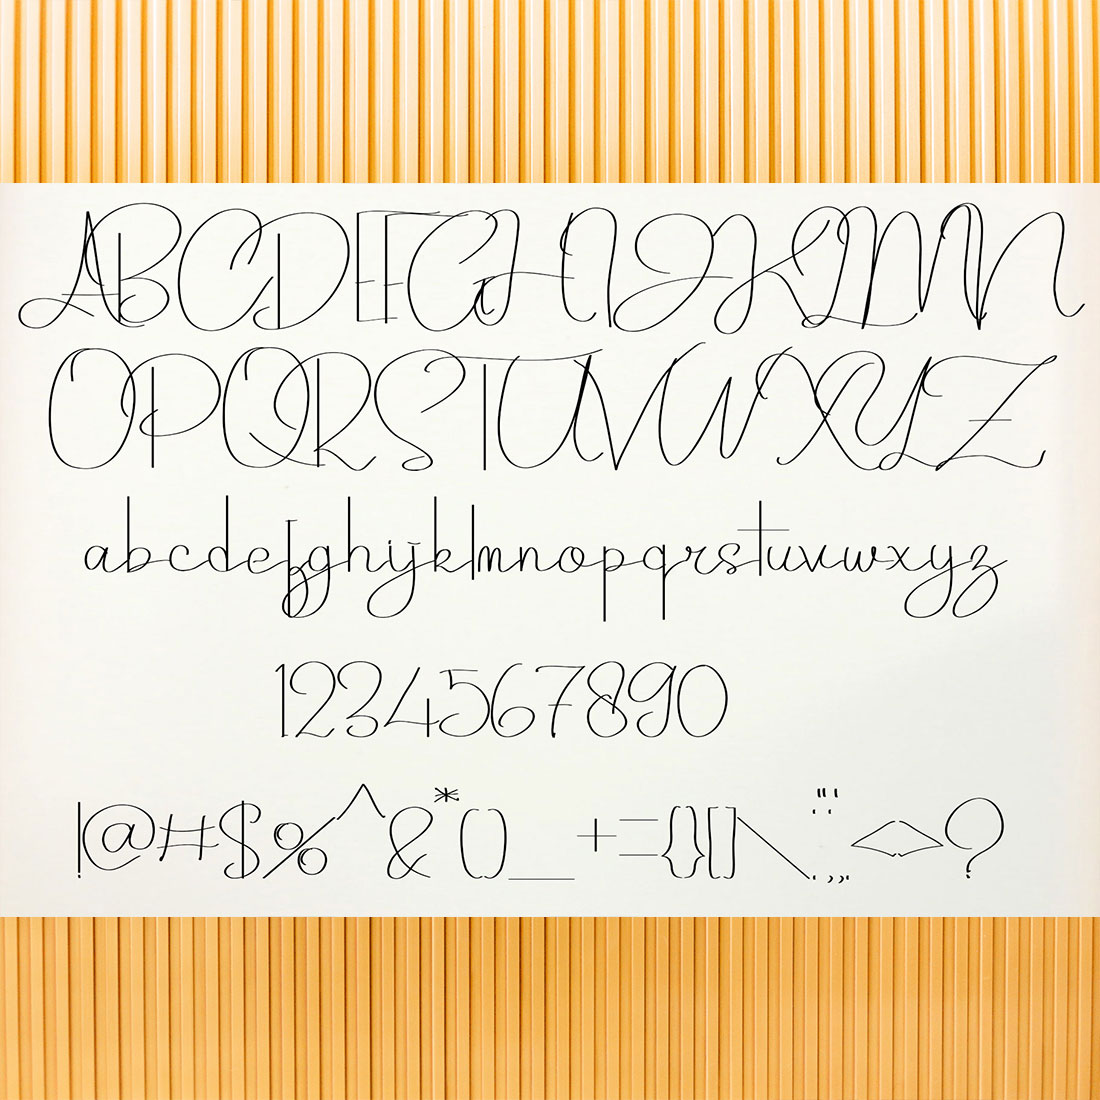 Image of the alphabet showing the beautiful Jagathy Canthyk font.